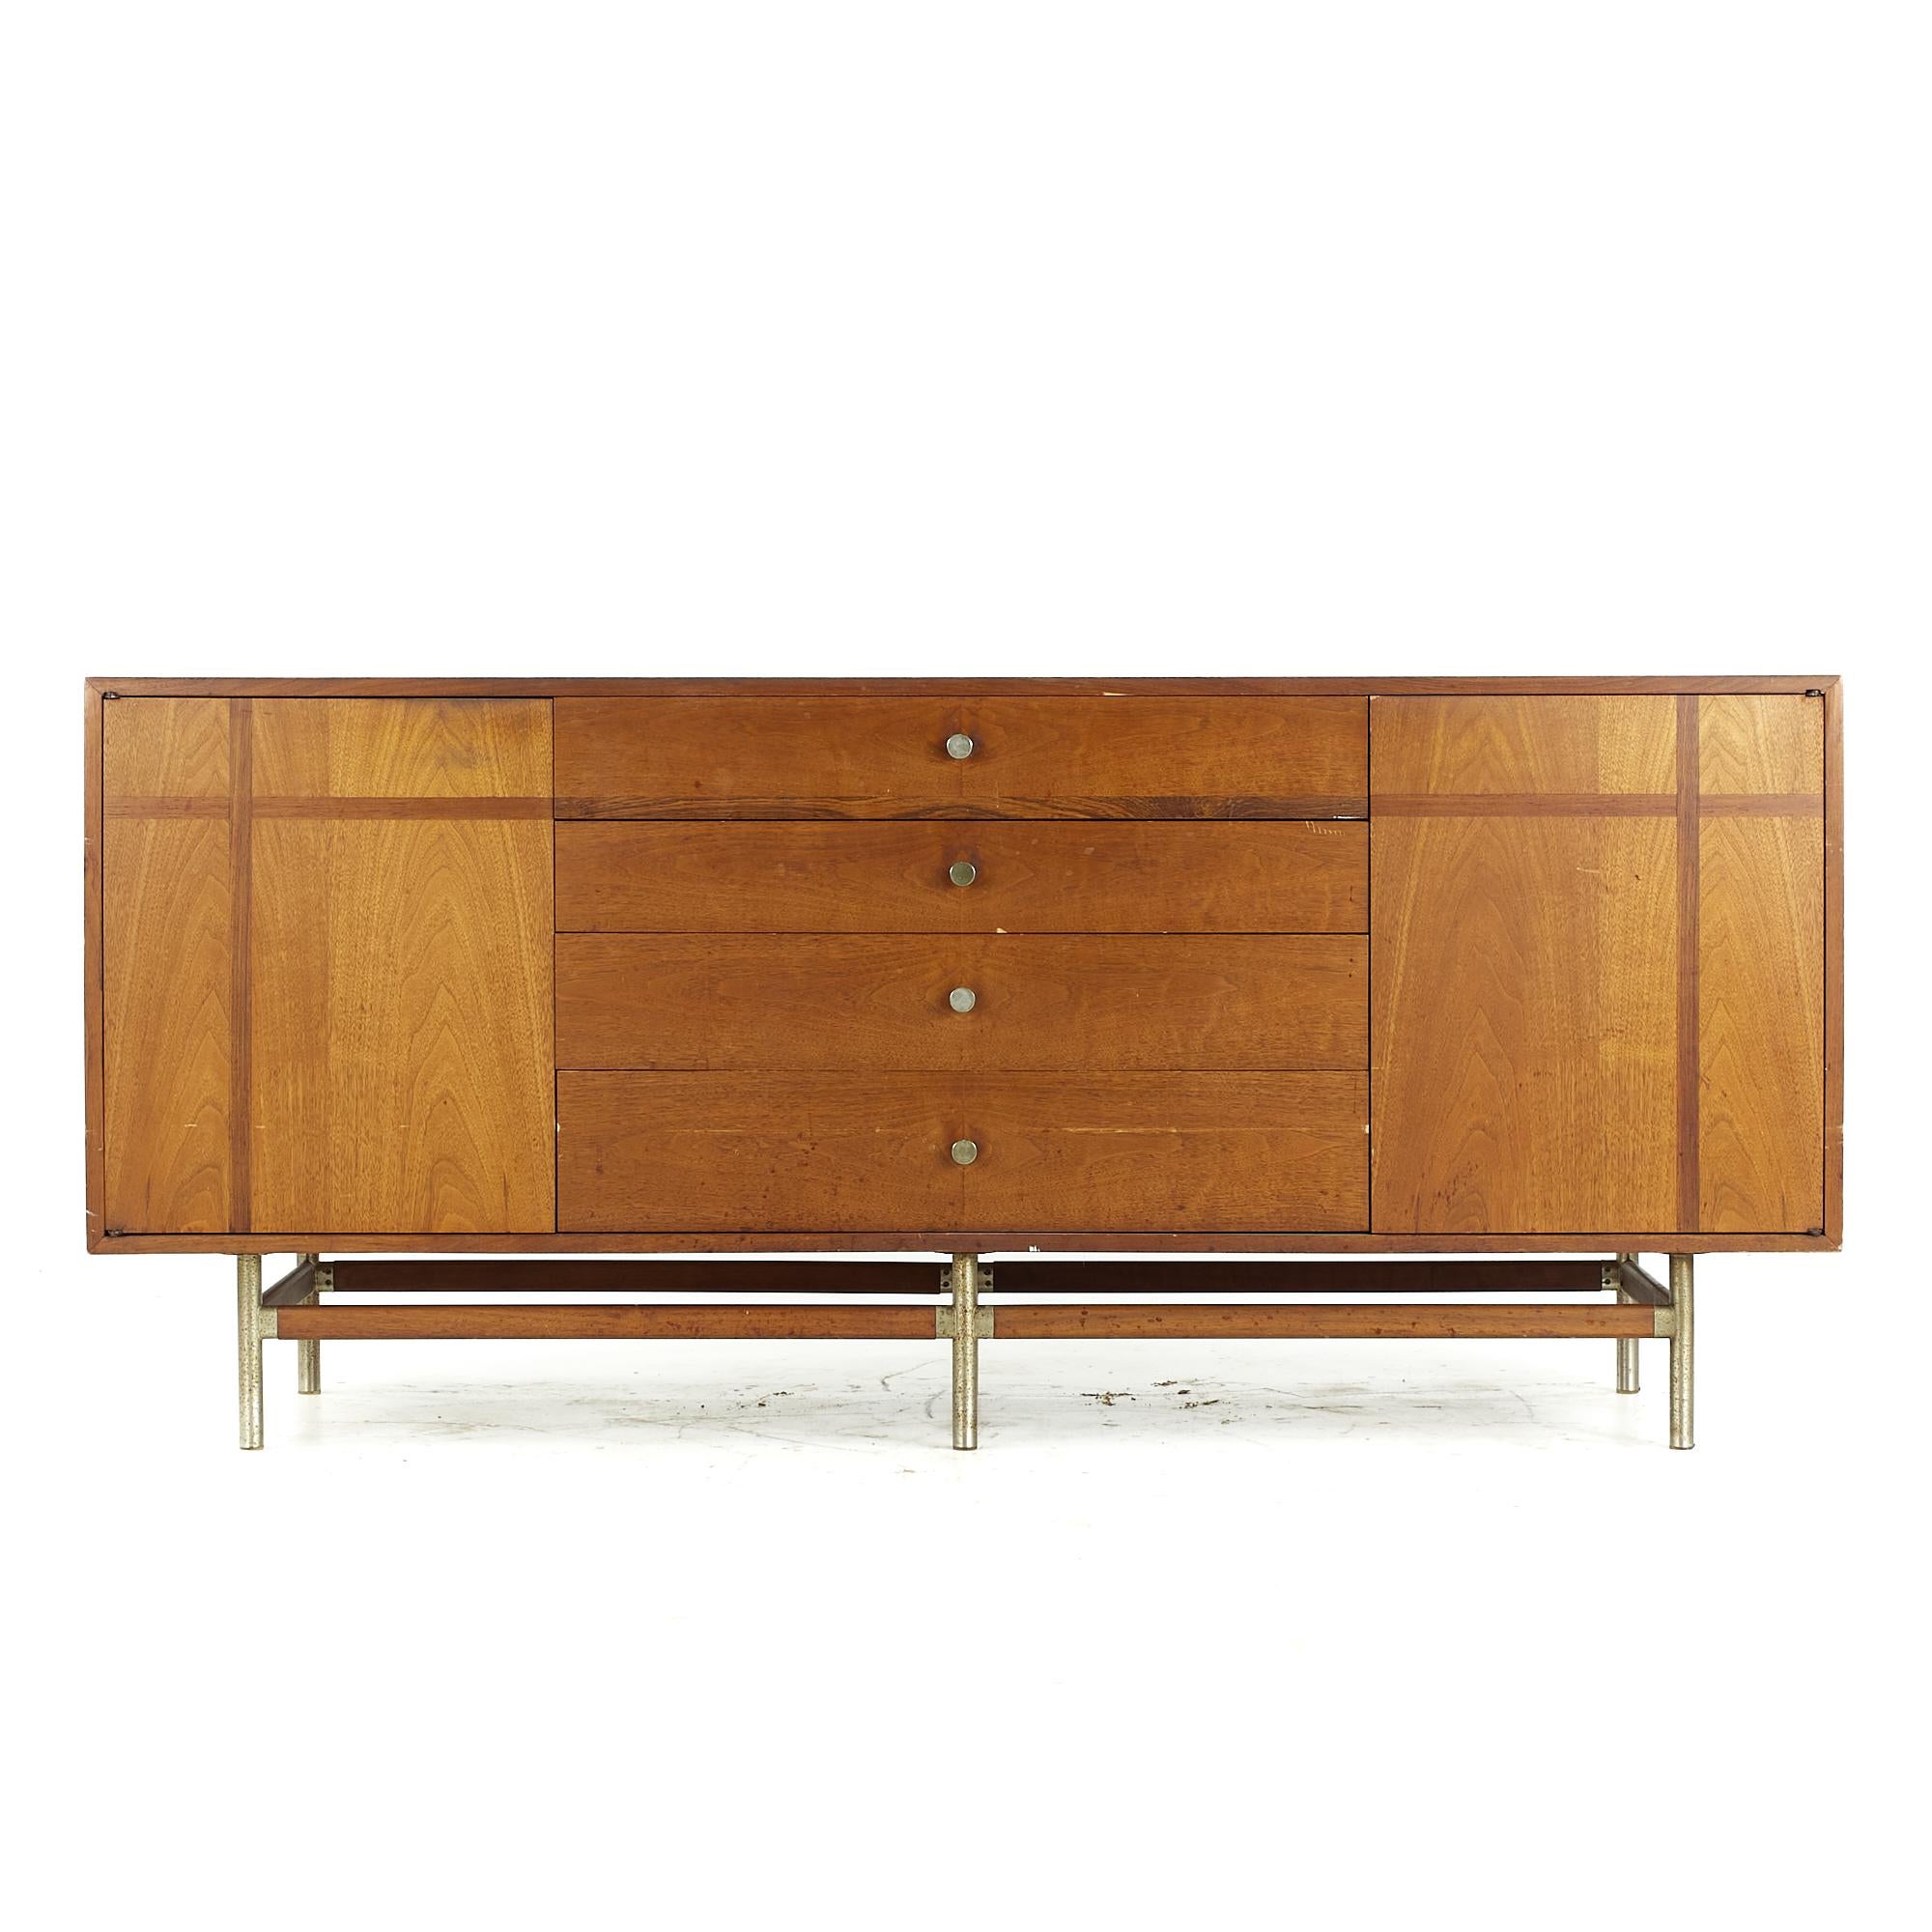 Kroehler Signature midcentury Walnut and Rosewood Lowboy Dresser

This lowboy measures: 70 wide x 19 deep x 31 inches high

All pieces of furniture can be had in what we call restored vintage condition. That means the piece is restored upon